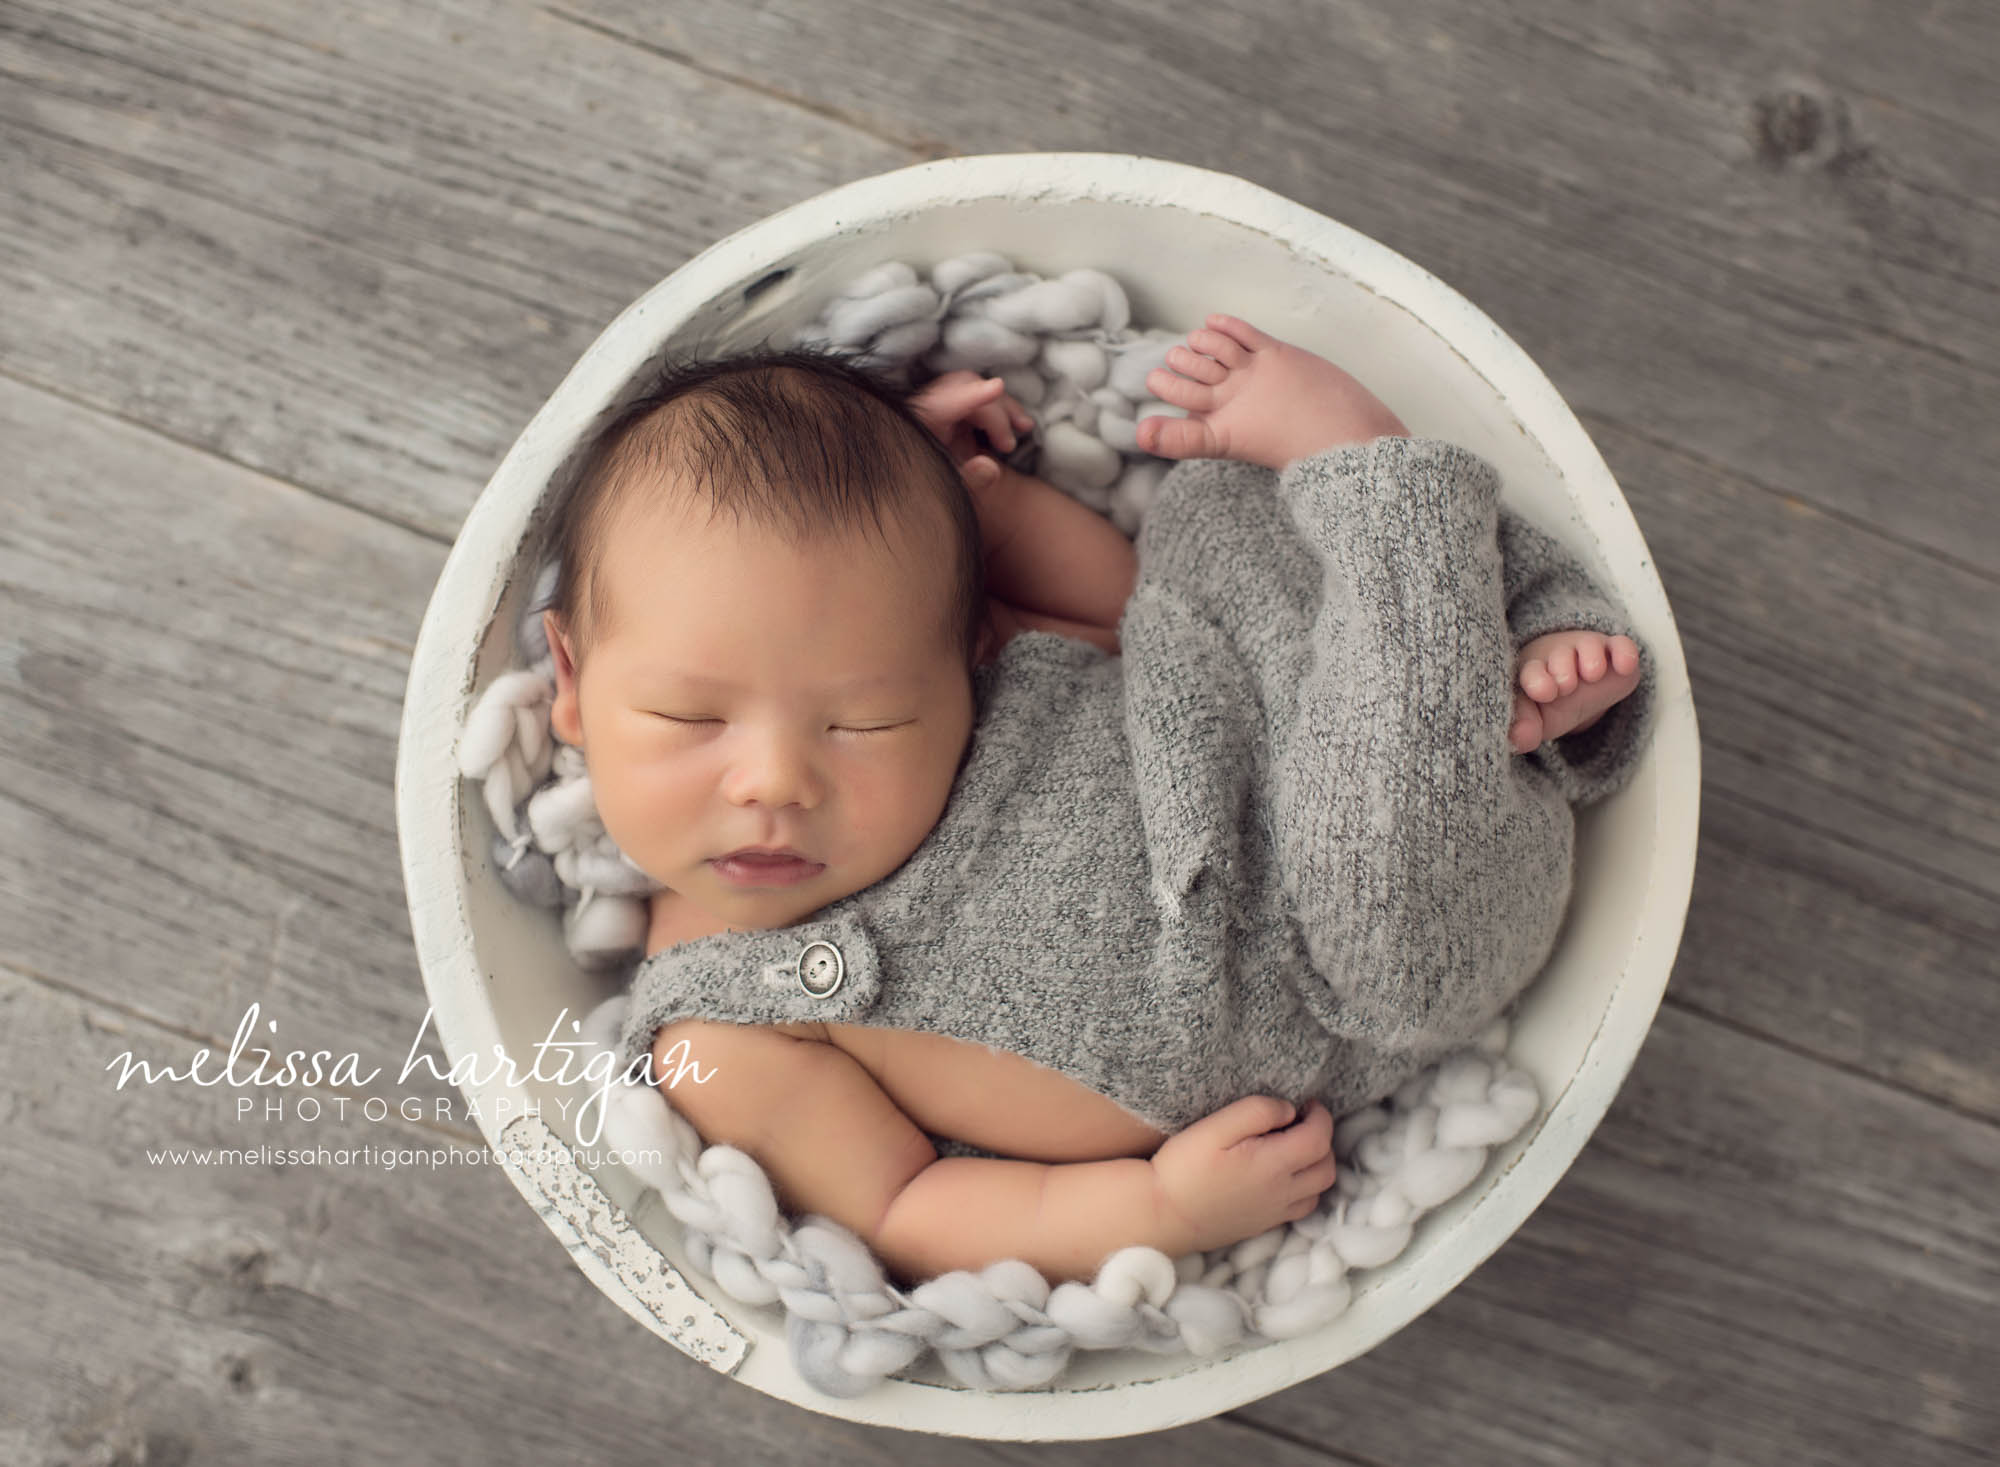 Melissa Hartigan Photography Maternity and Newborn Connecticut Photographer Lucas Newborn Session Baby boy sleeping in antiqued white bowl on light blue chunky knit blanket wearing gray knit overalls